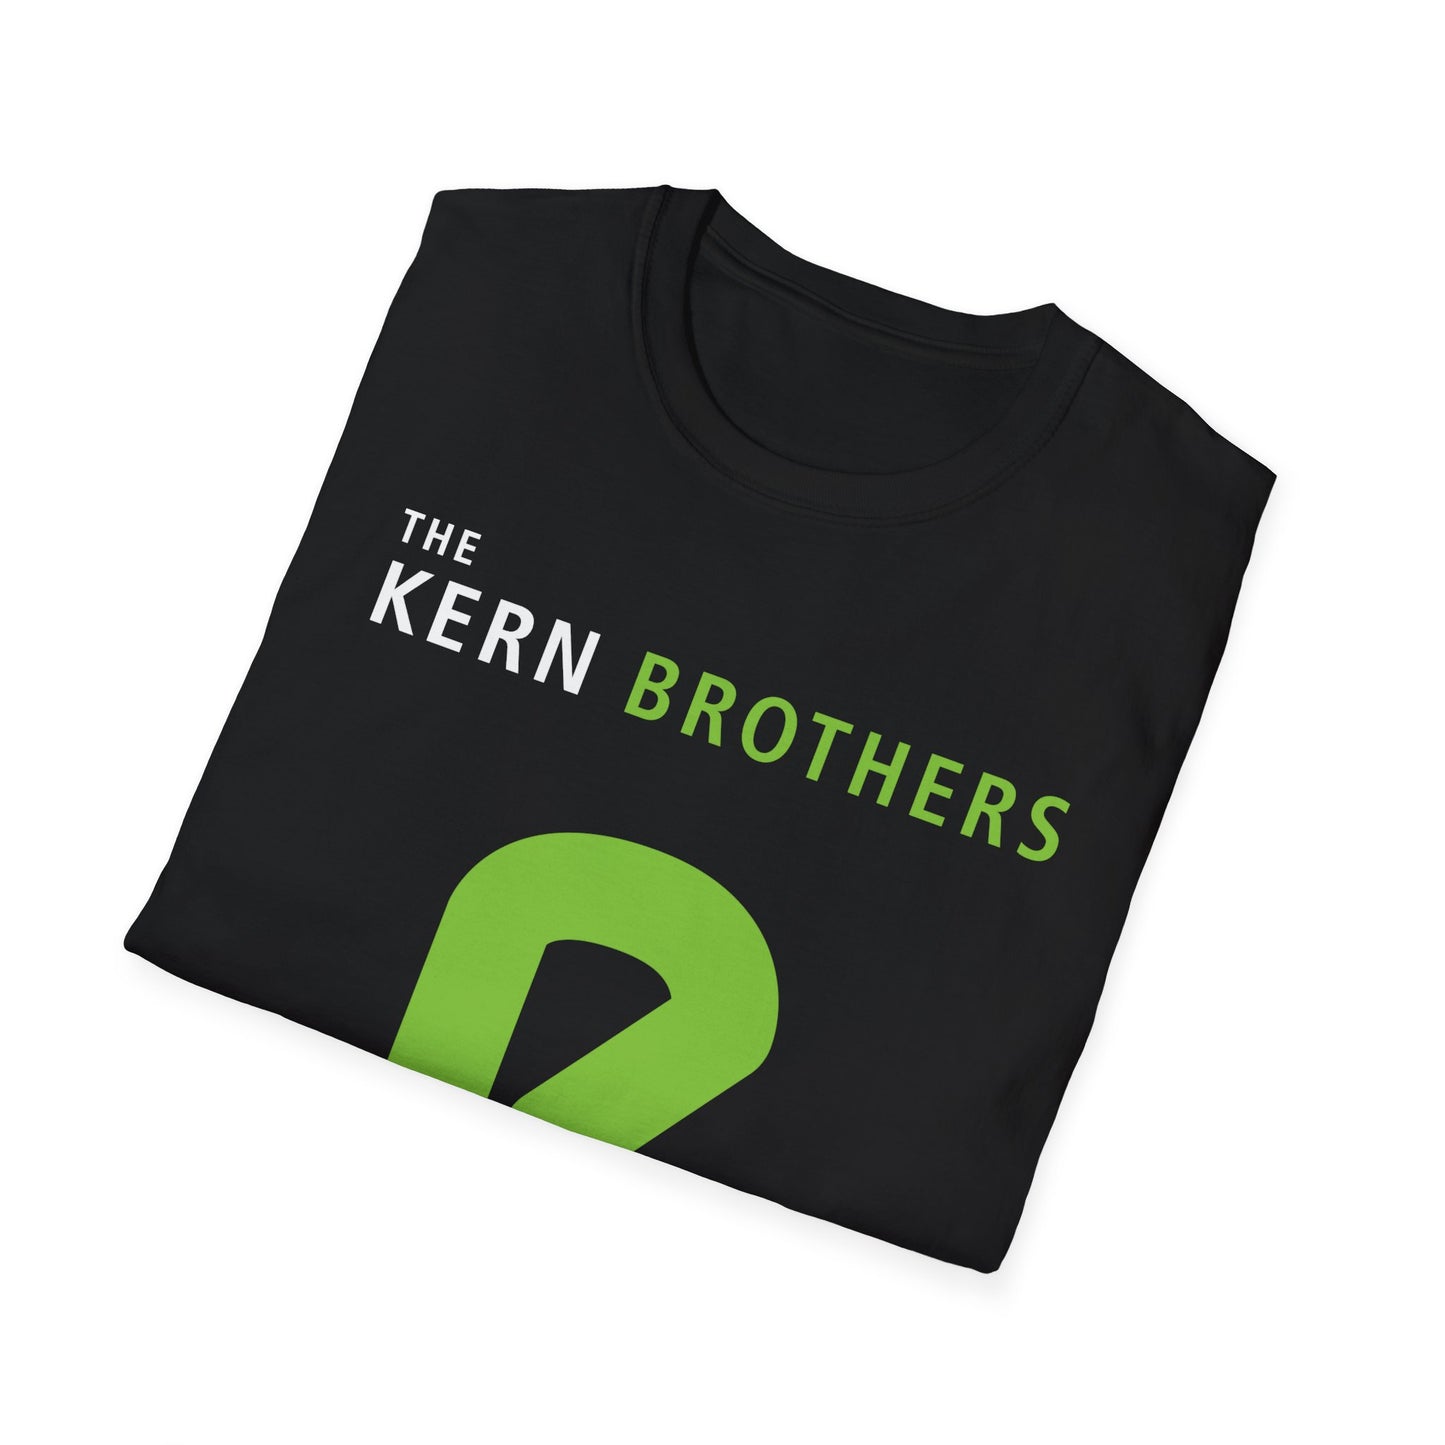 The Kern Brothers - Unisex Softstyle T-Shirt